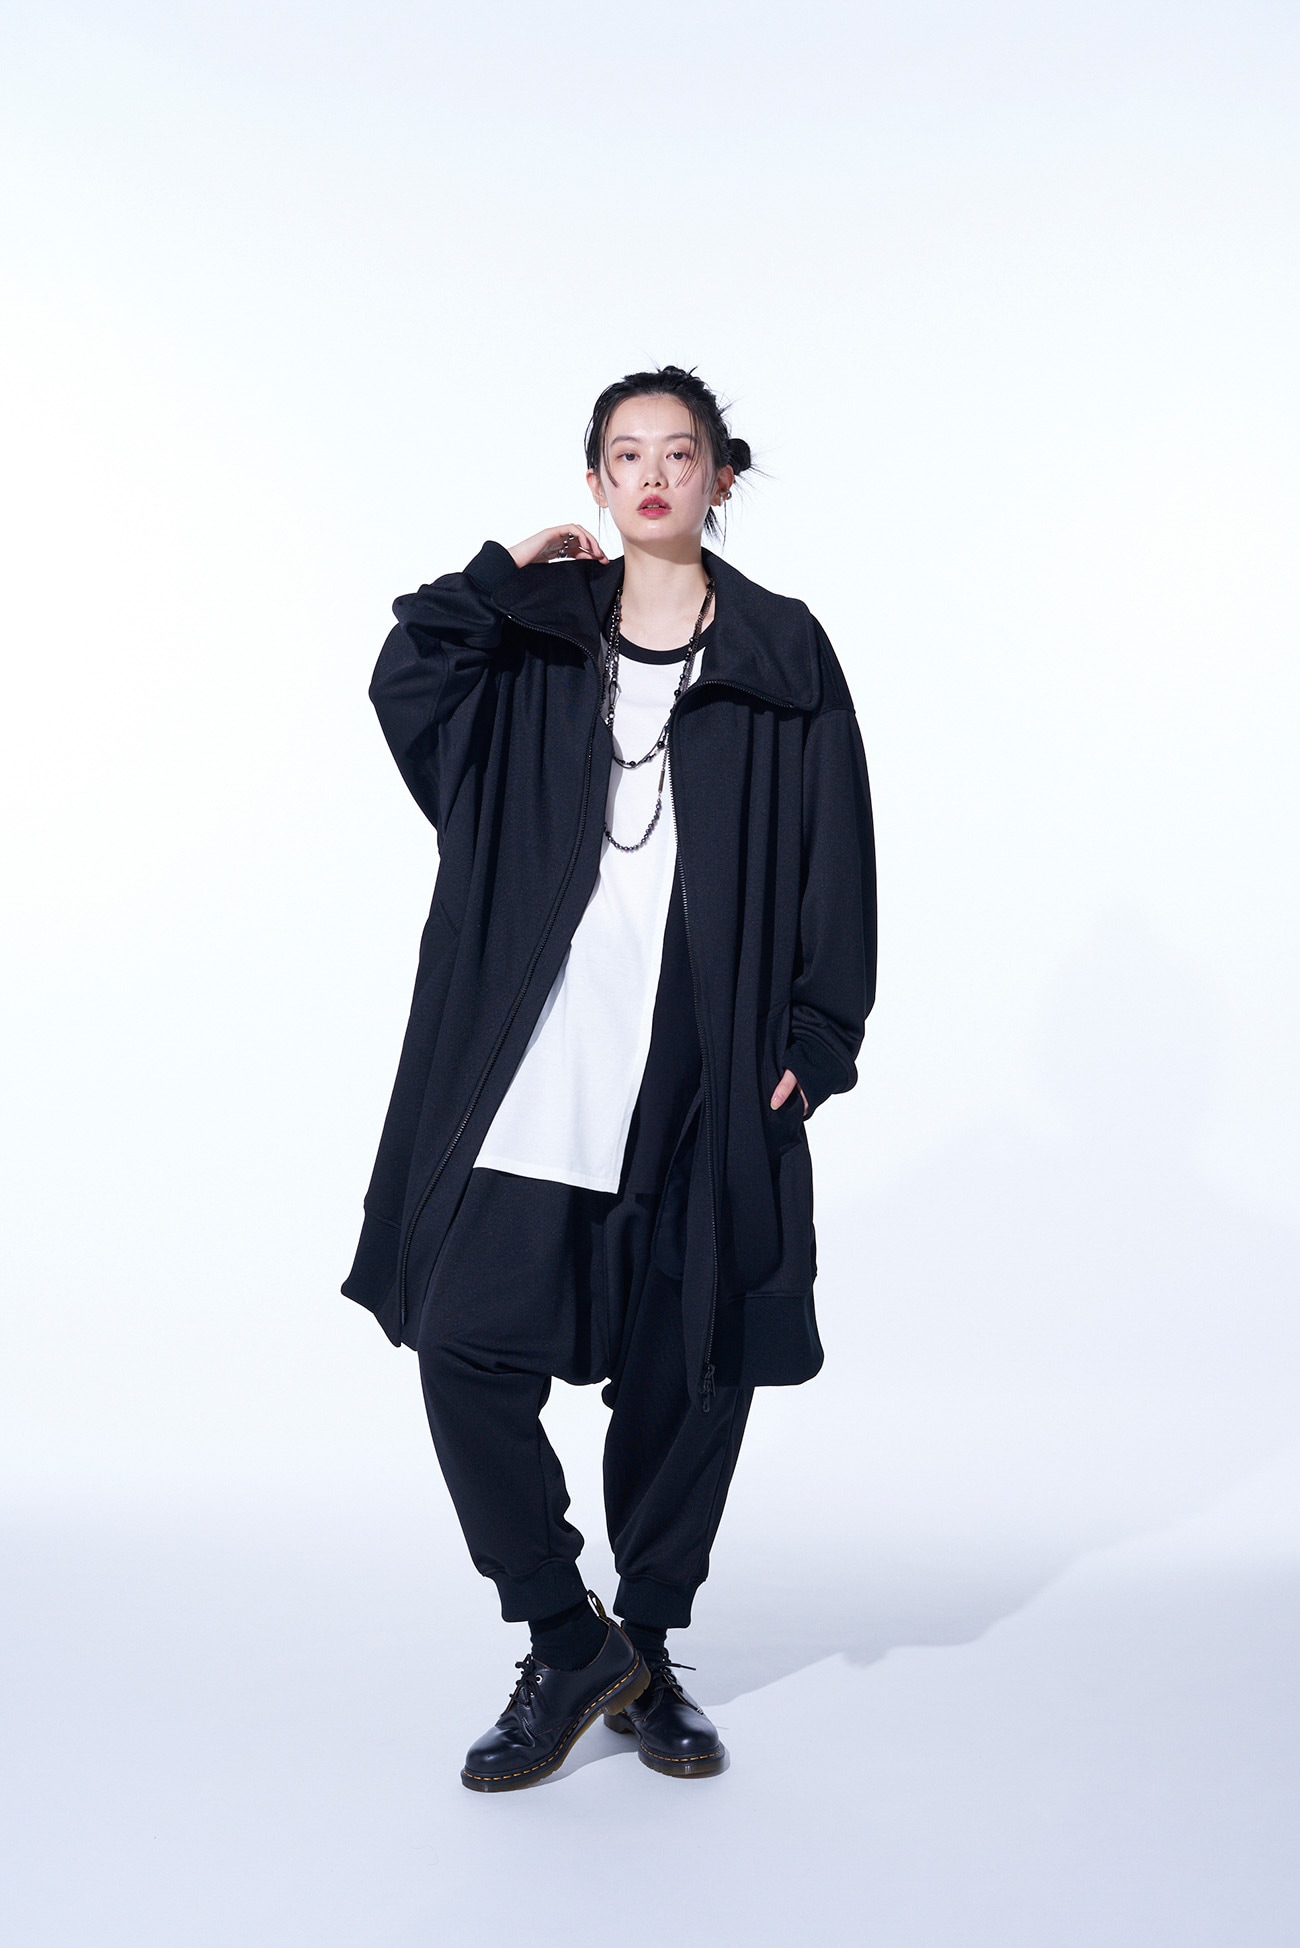 POLYESTER SMOOTH JERSEY OVERSIZED LONG TRUCK TOP(M Black): S'YTE 